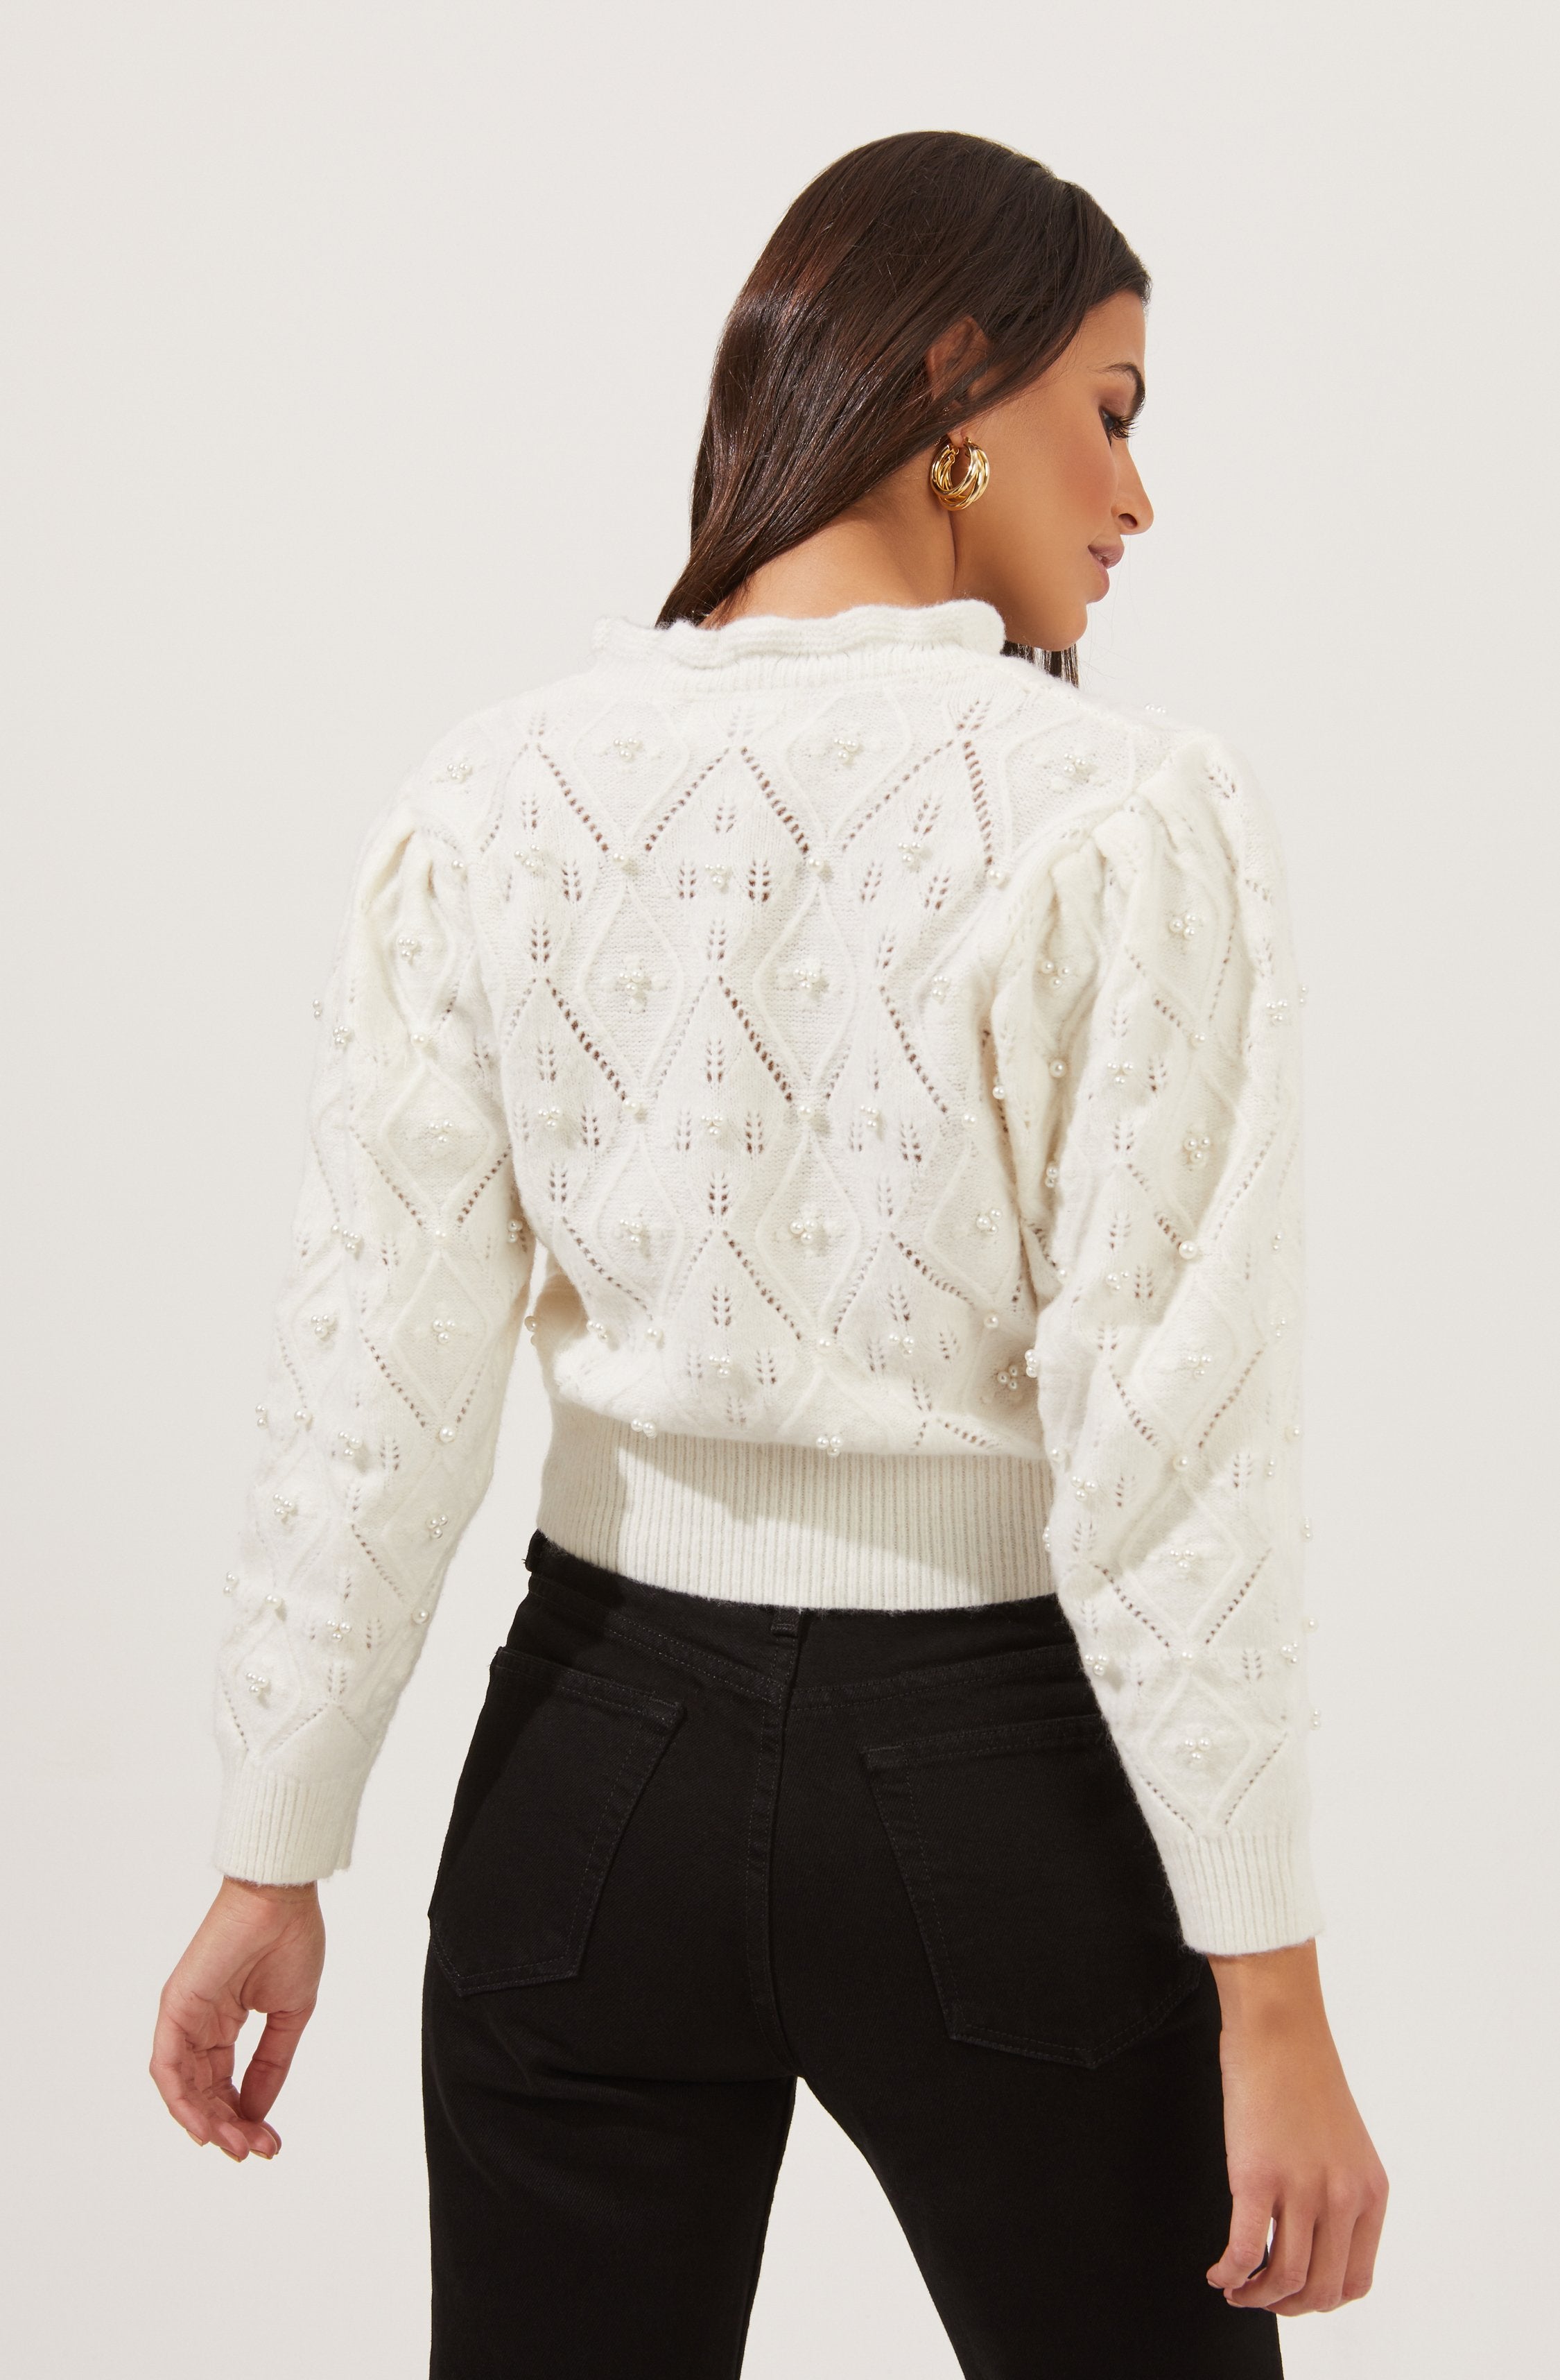 Taya Pearl Embellished Pointelle Frill Neck Sweater